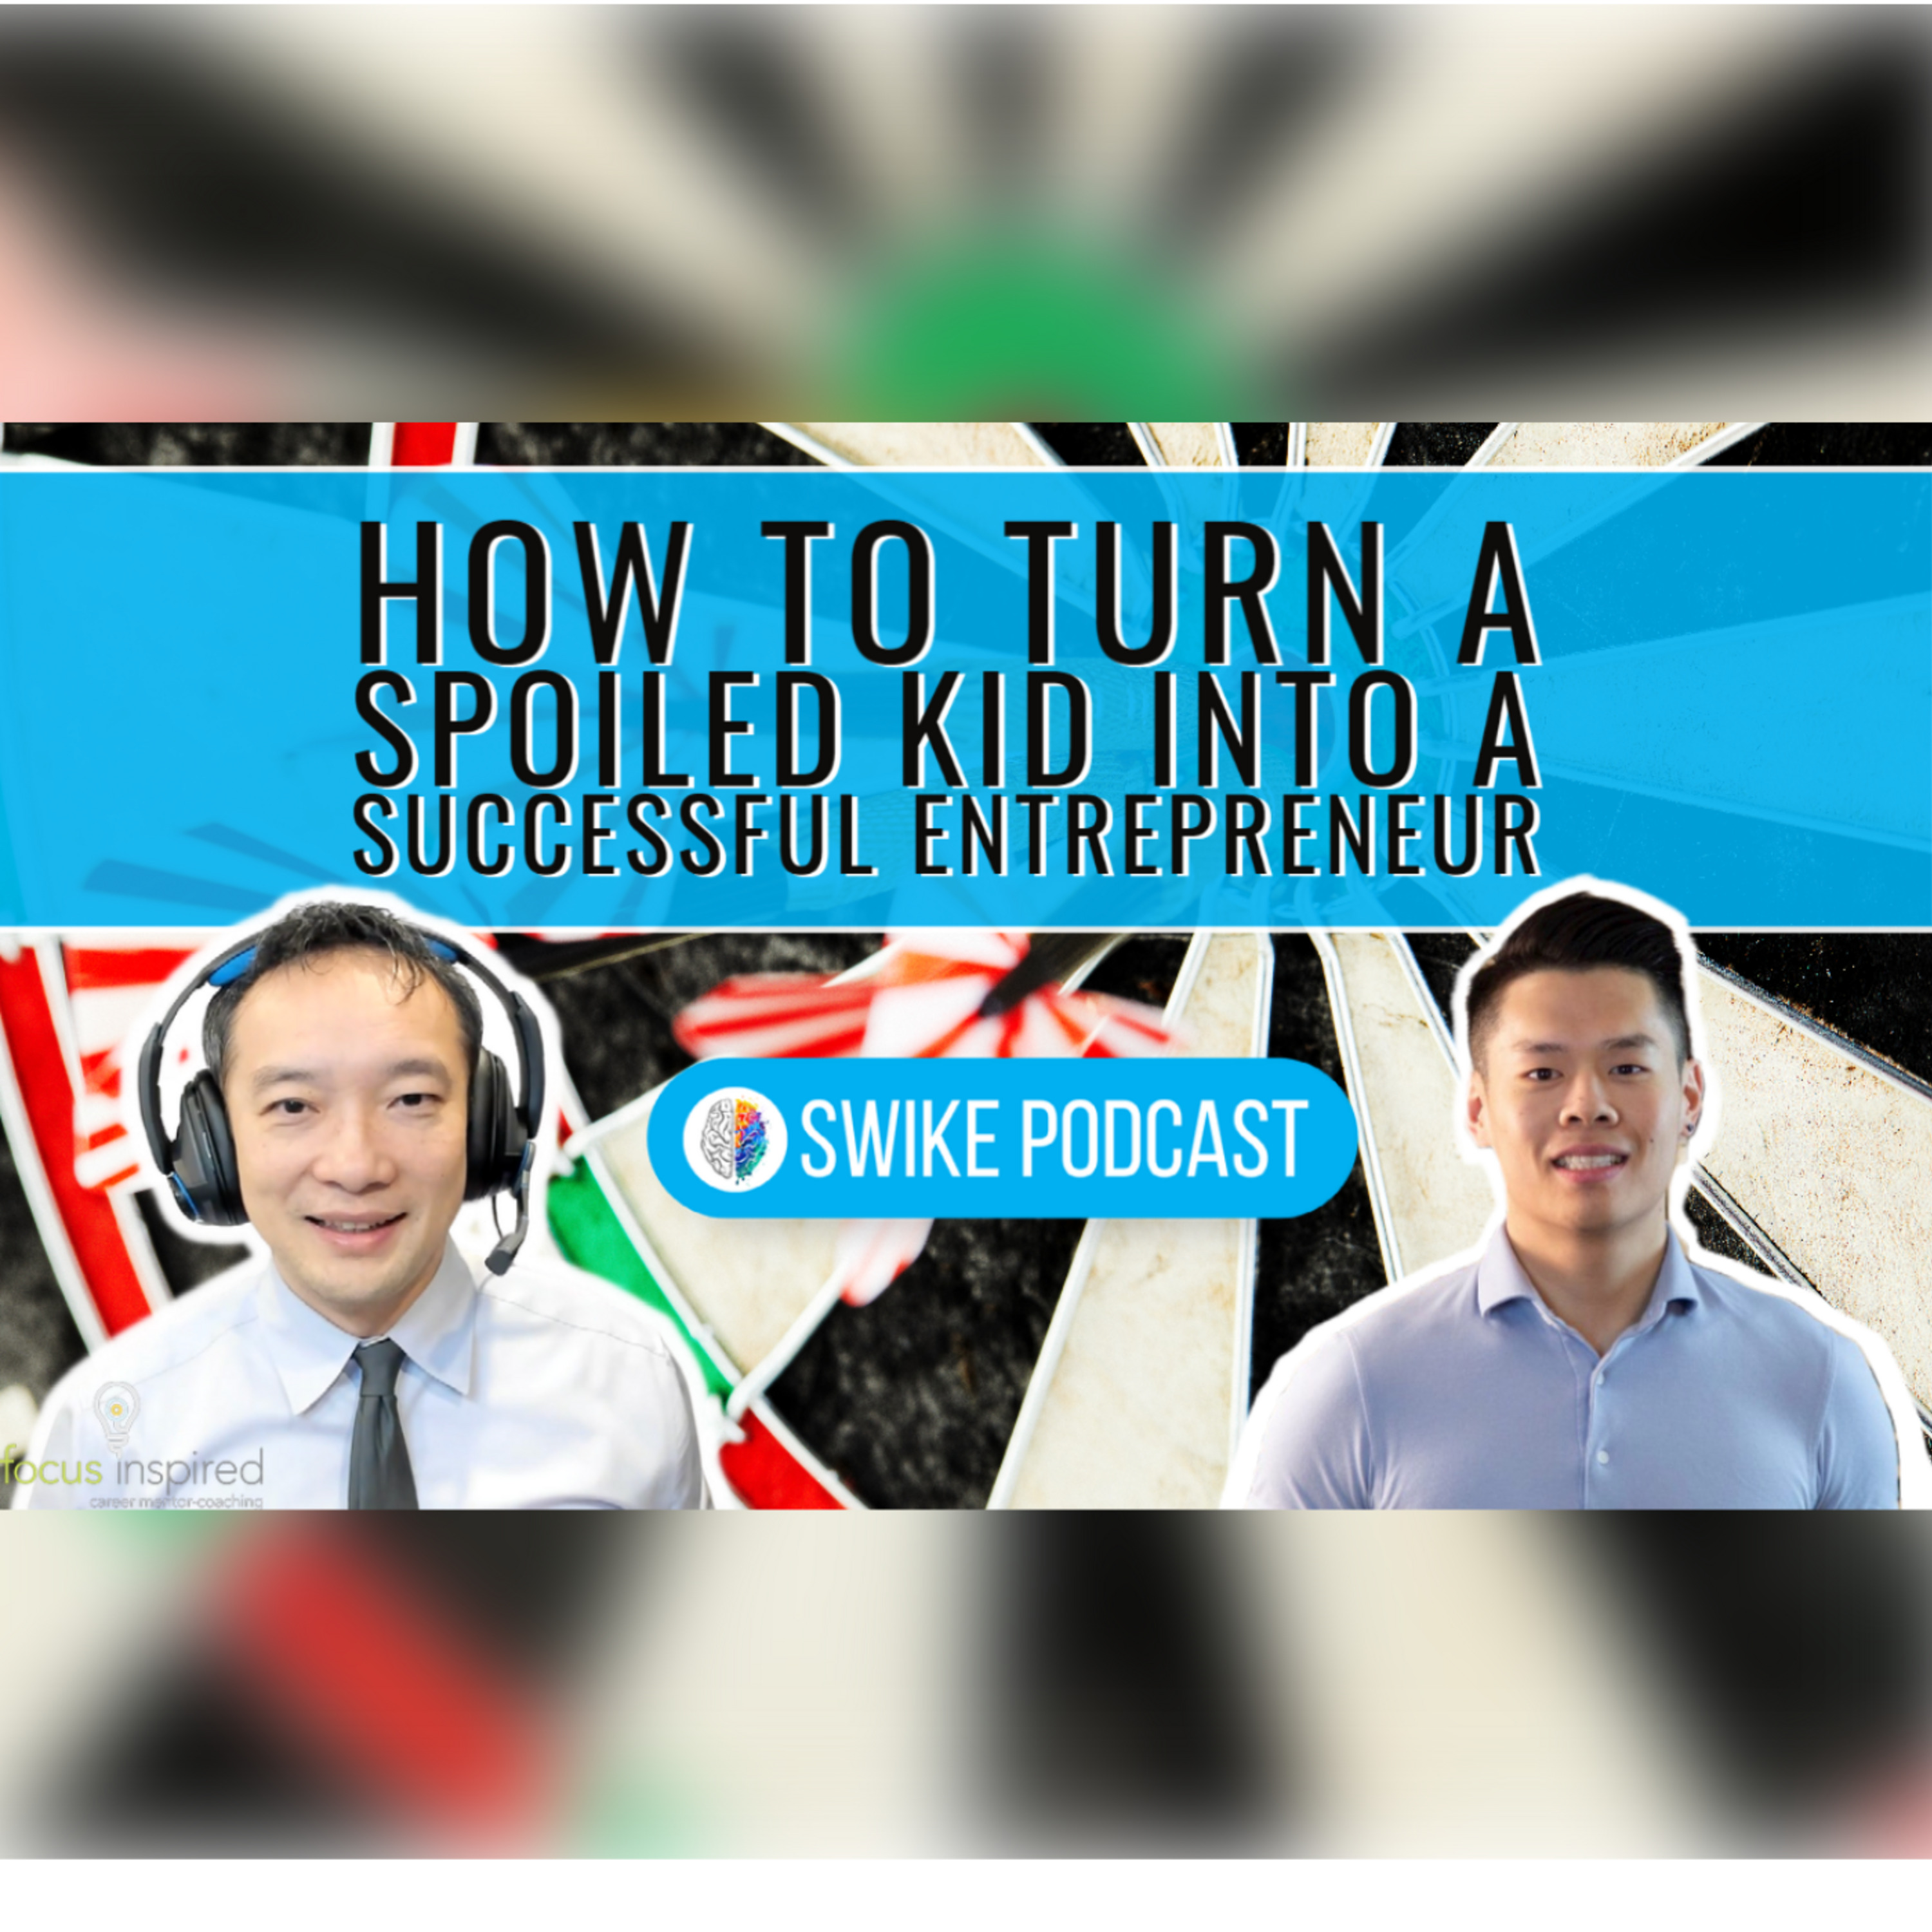 How to turn a spoiled kid into a successful entrepreneur | SIWIKE Podcast | Tony Sicheng Li (TL-001)